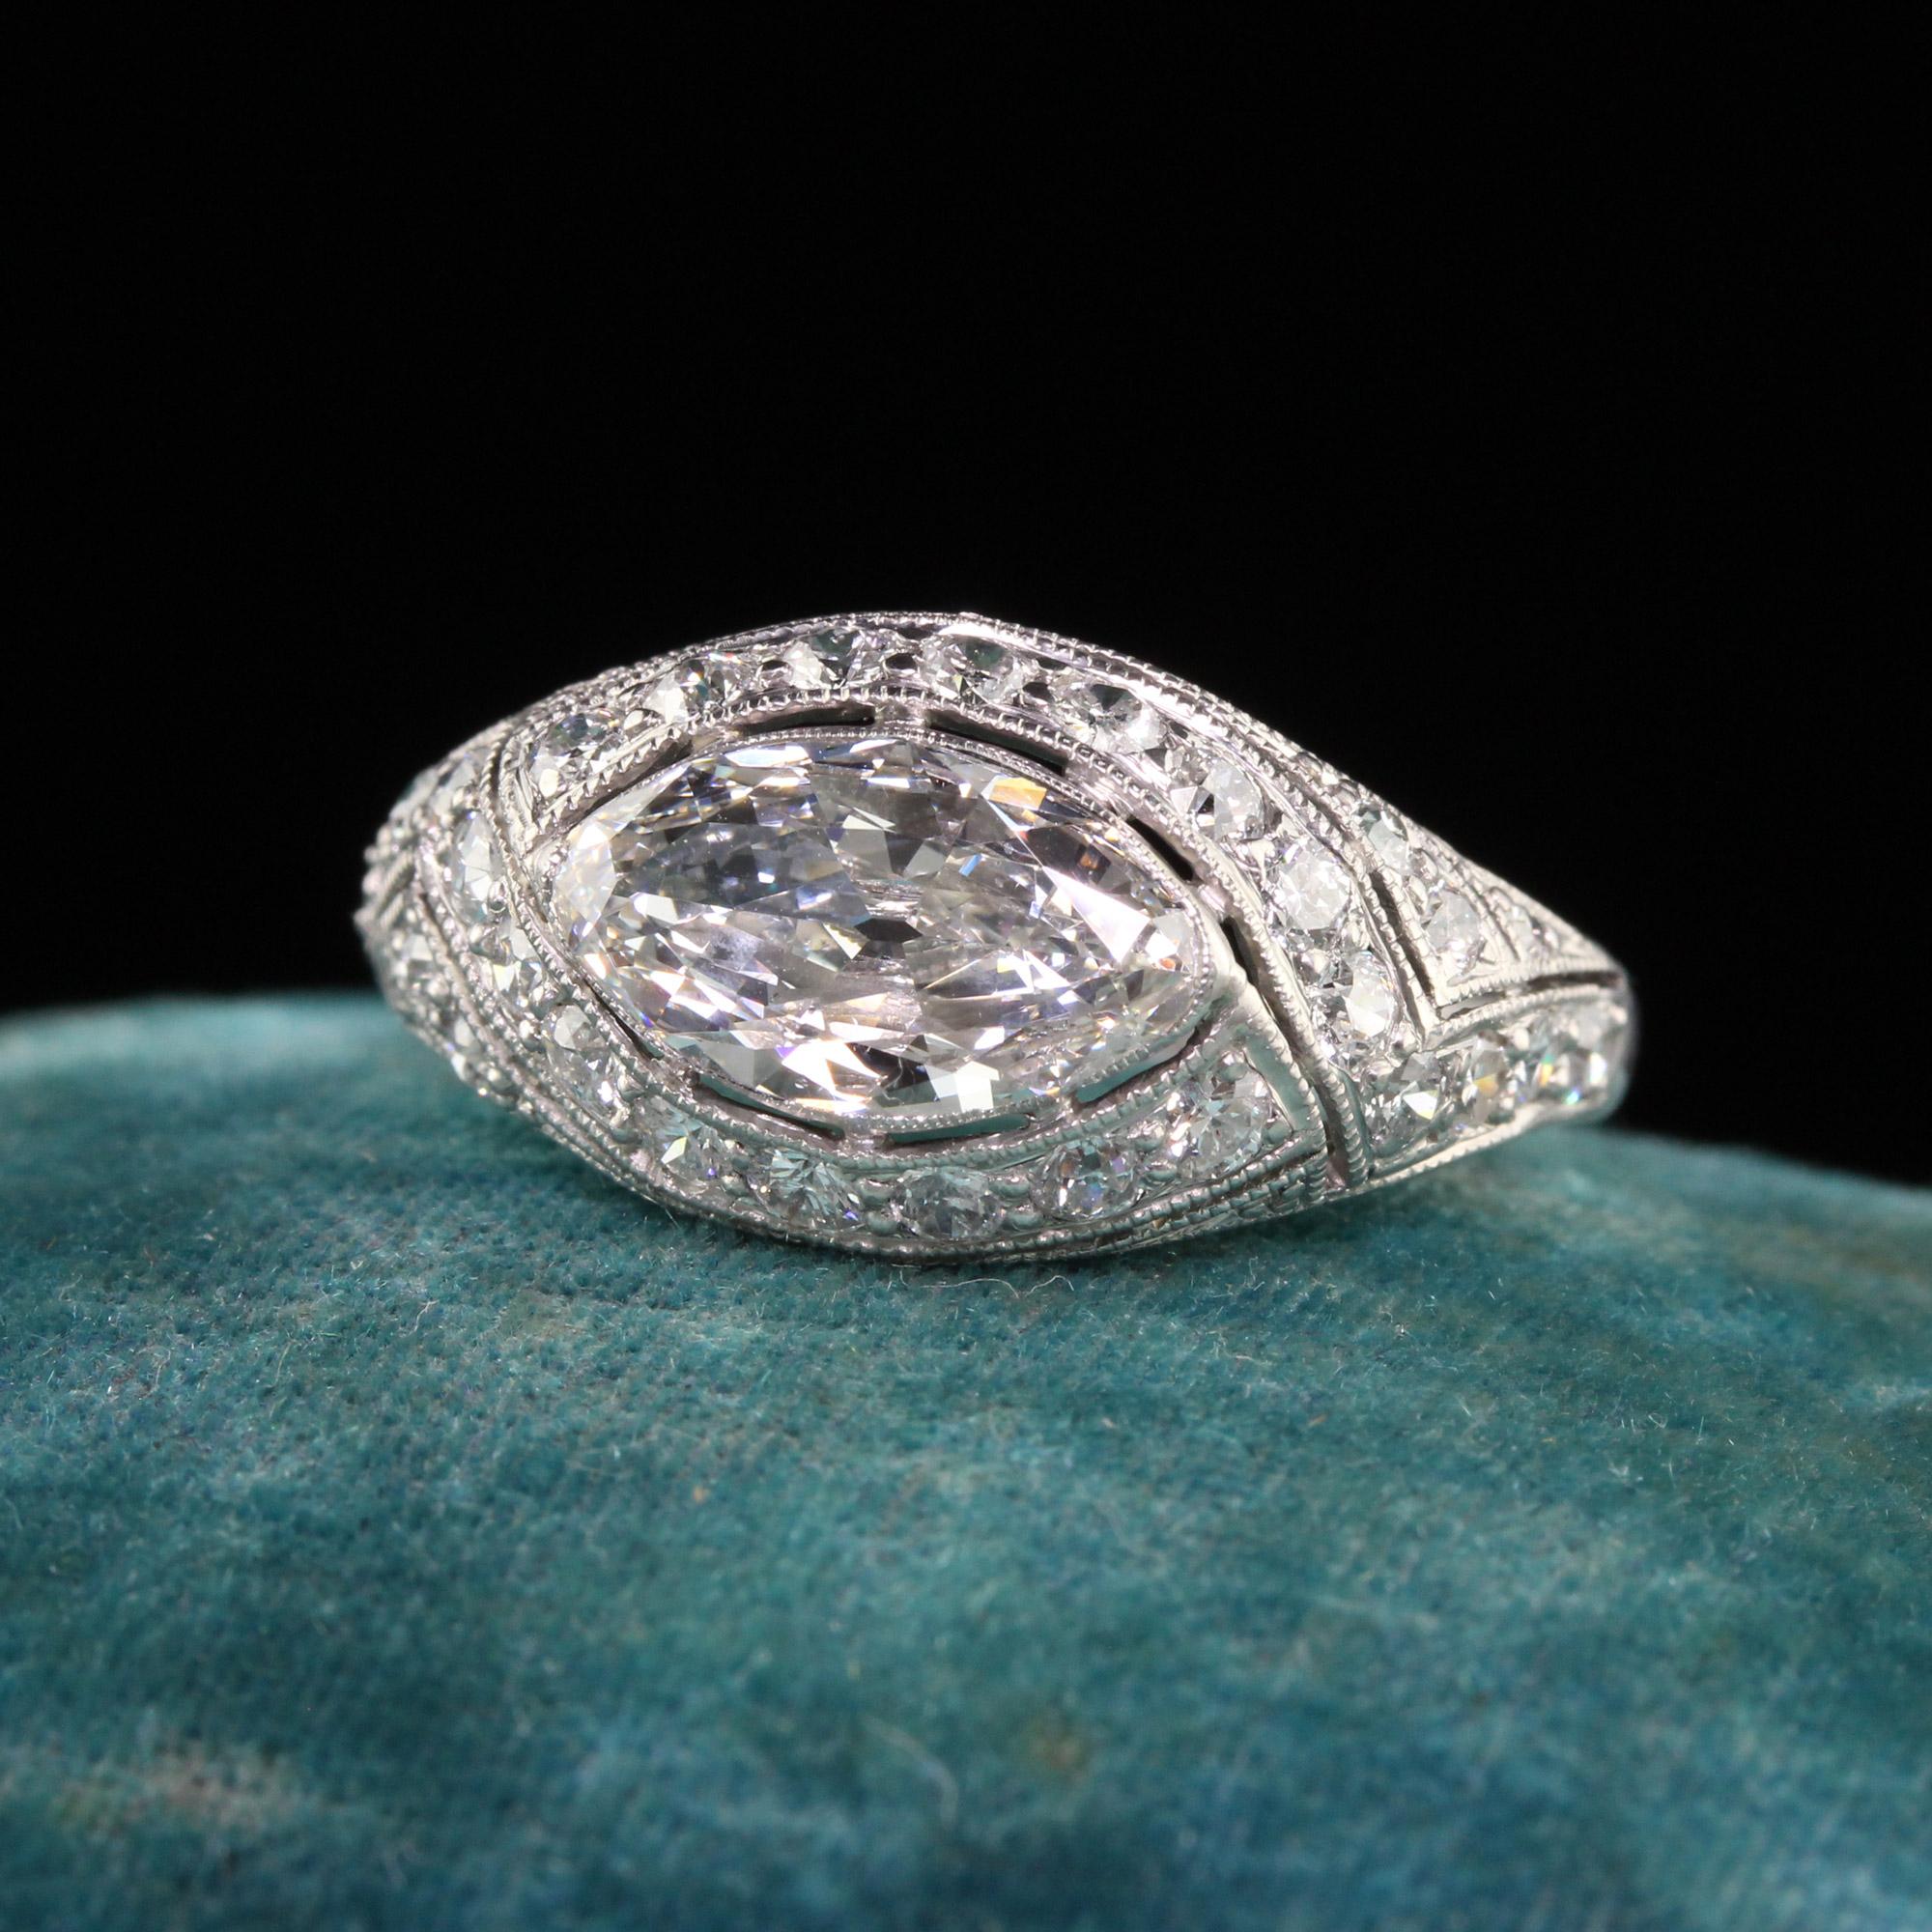 Beautiful Antique Art Deco Platinum Old Marquise Diamond Filigree Engagement Ring - GIA. This gorgeous engagement ring is crafted in platinum. The center holds an old marquise cut diamond that is GIA certified. This gorgeous diamond is set in an art